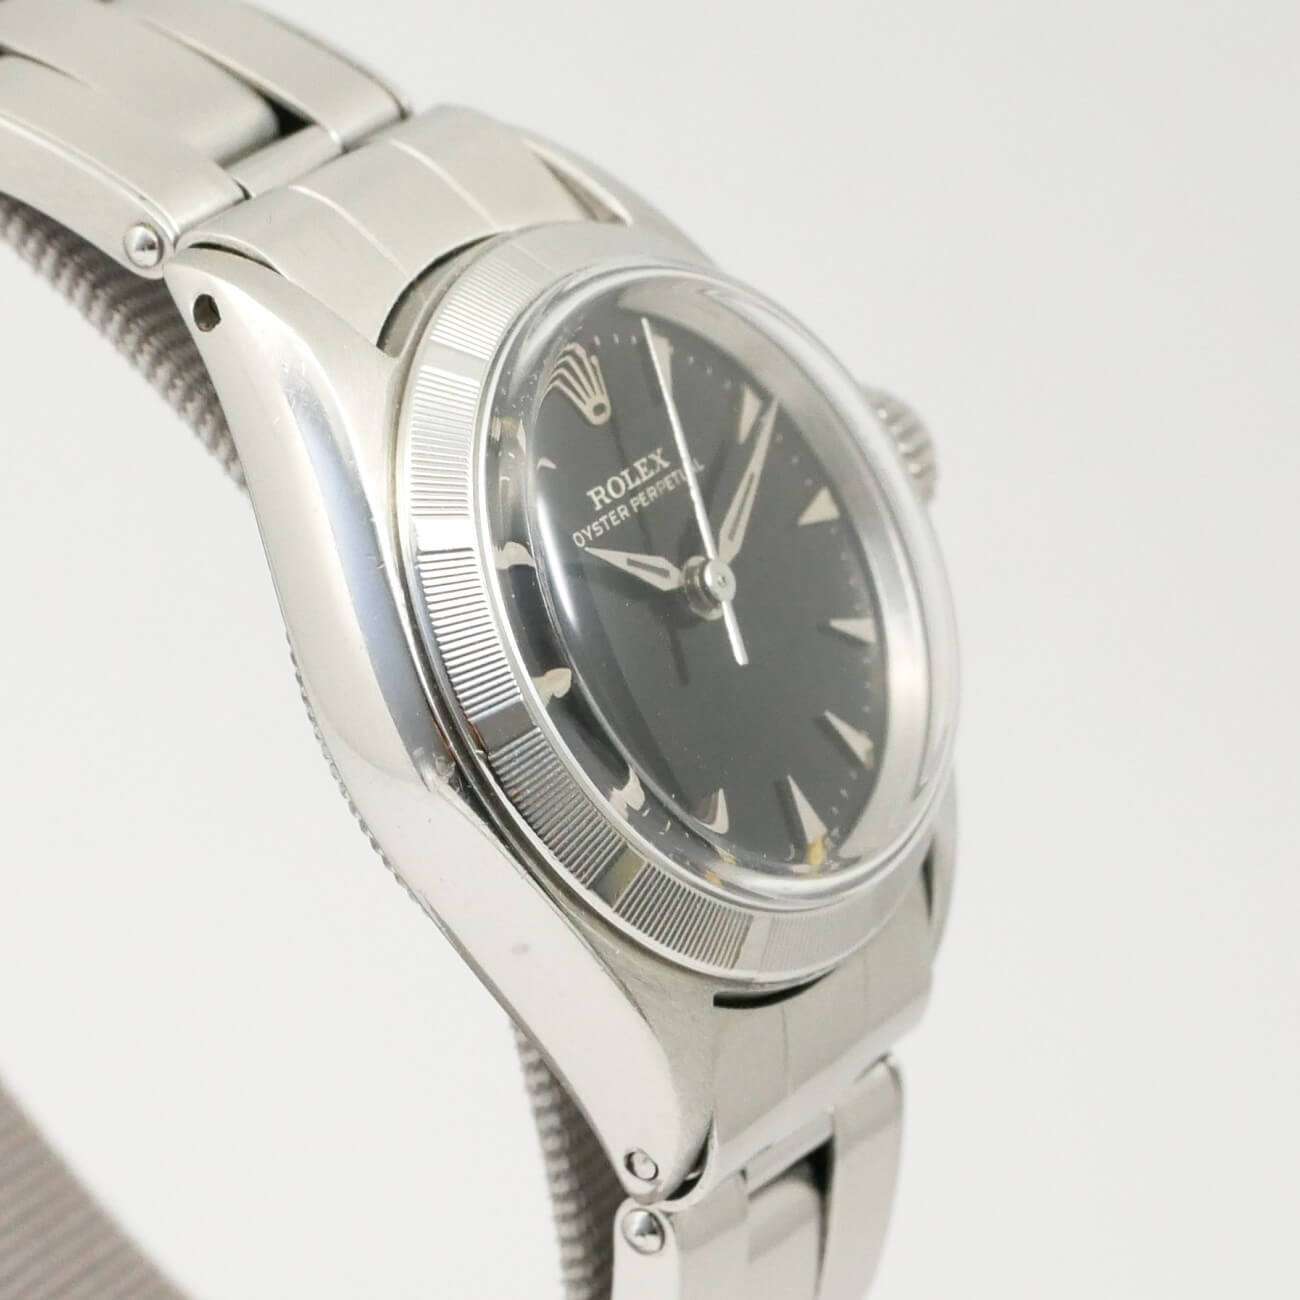 ROLEX OYSTER PERPETUAL 